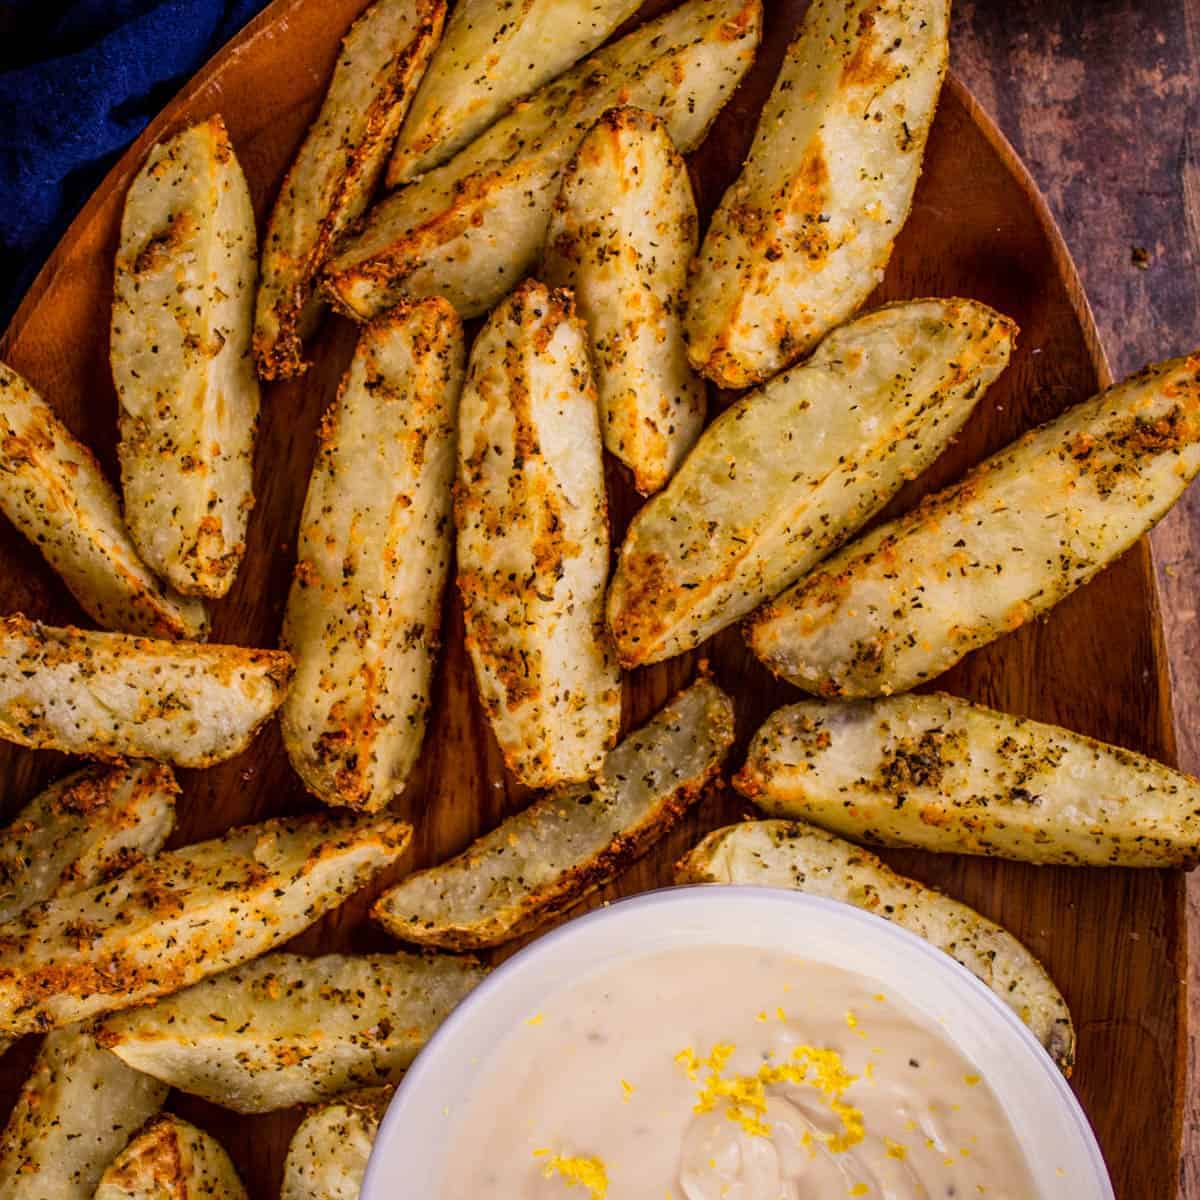 crispy potato wedges on a wooden tray with lemon aioli dip in a white bowl